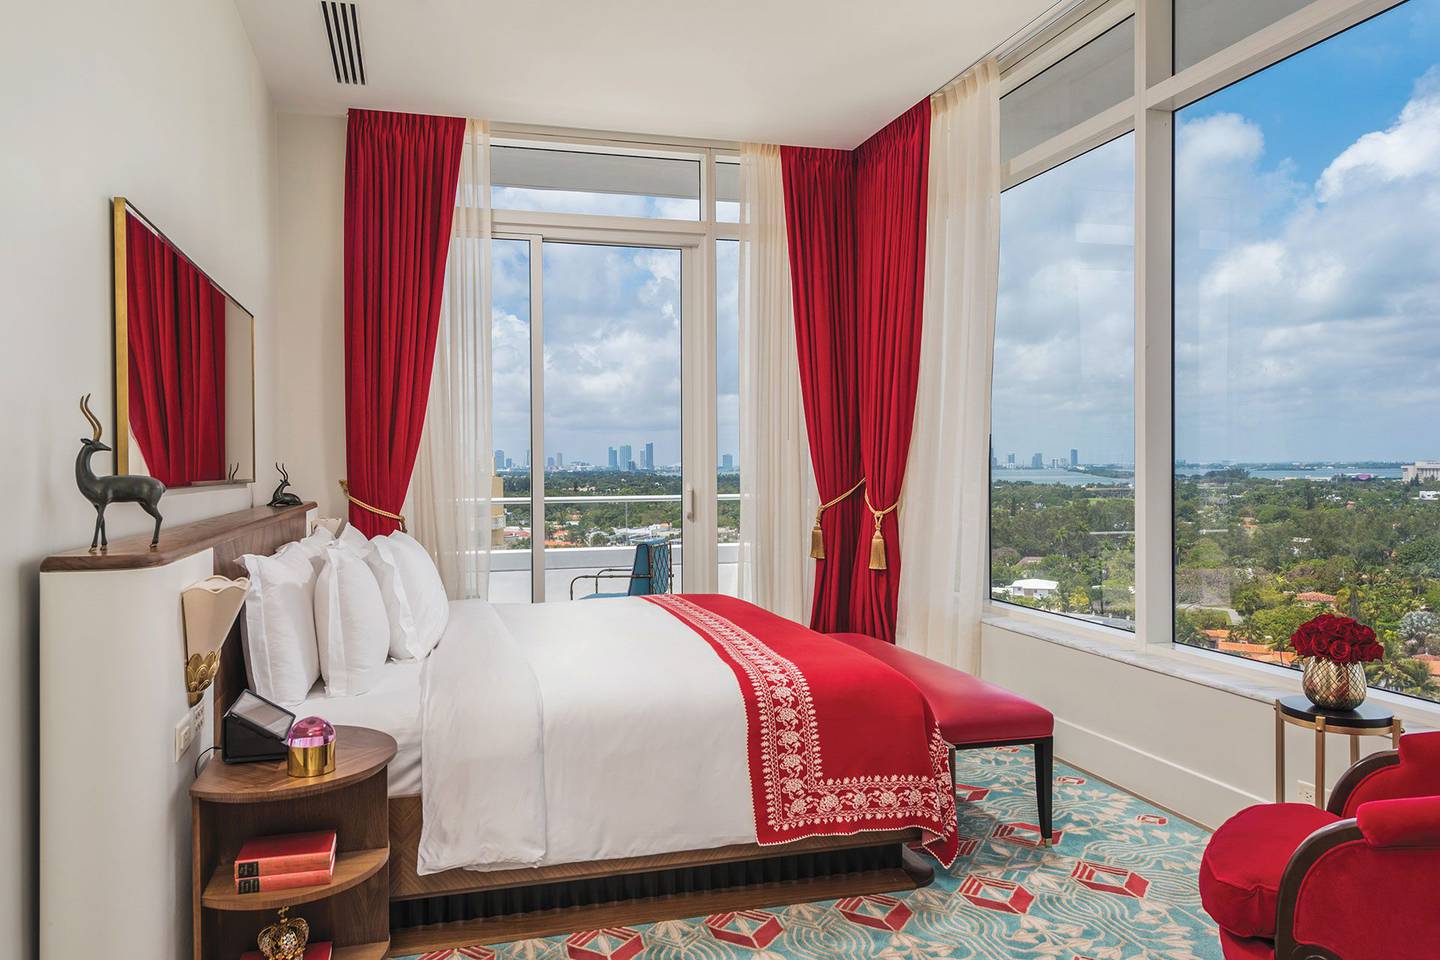 Faena Hotel Miami Beach is offering guests who book four nights or more in a Premier Oceanfront one-bedroom Suite (or higher) entrance to specially curated events and performances, plus access to their hospitality suite on race day.dfd